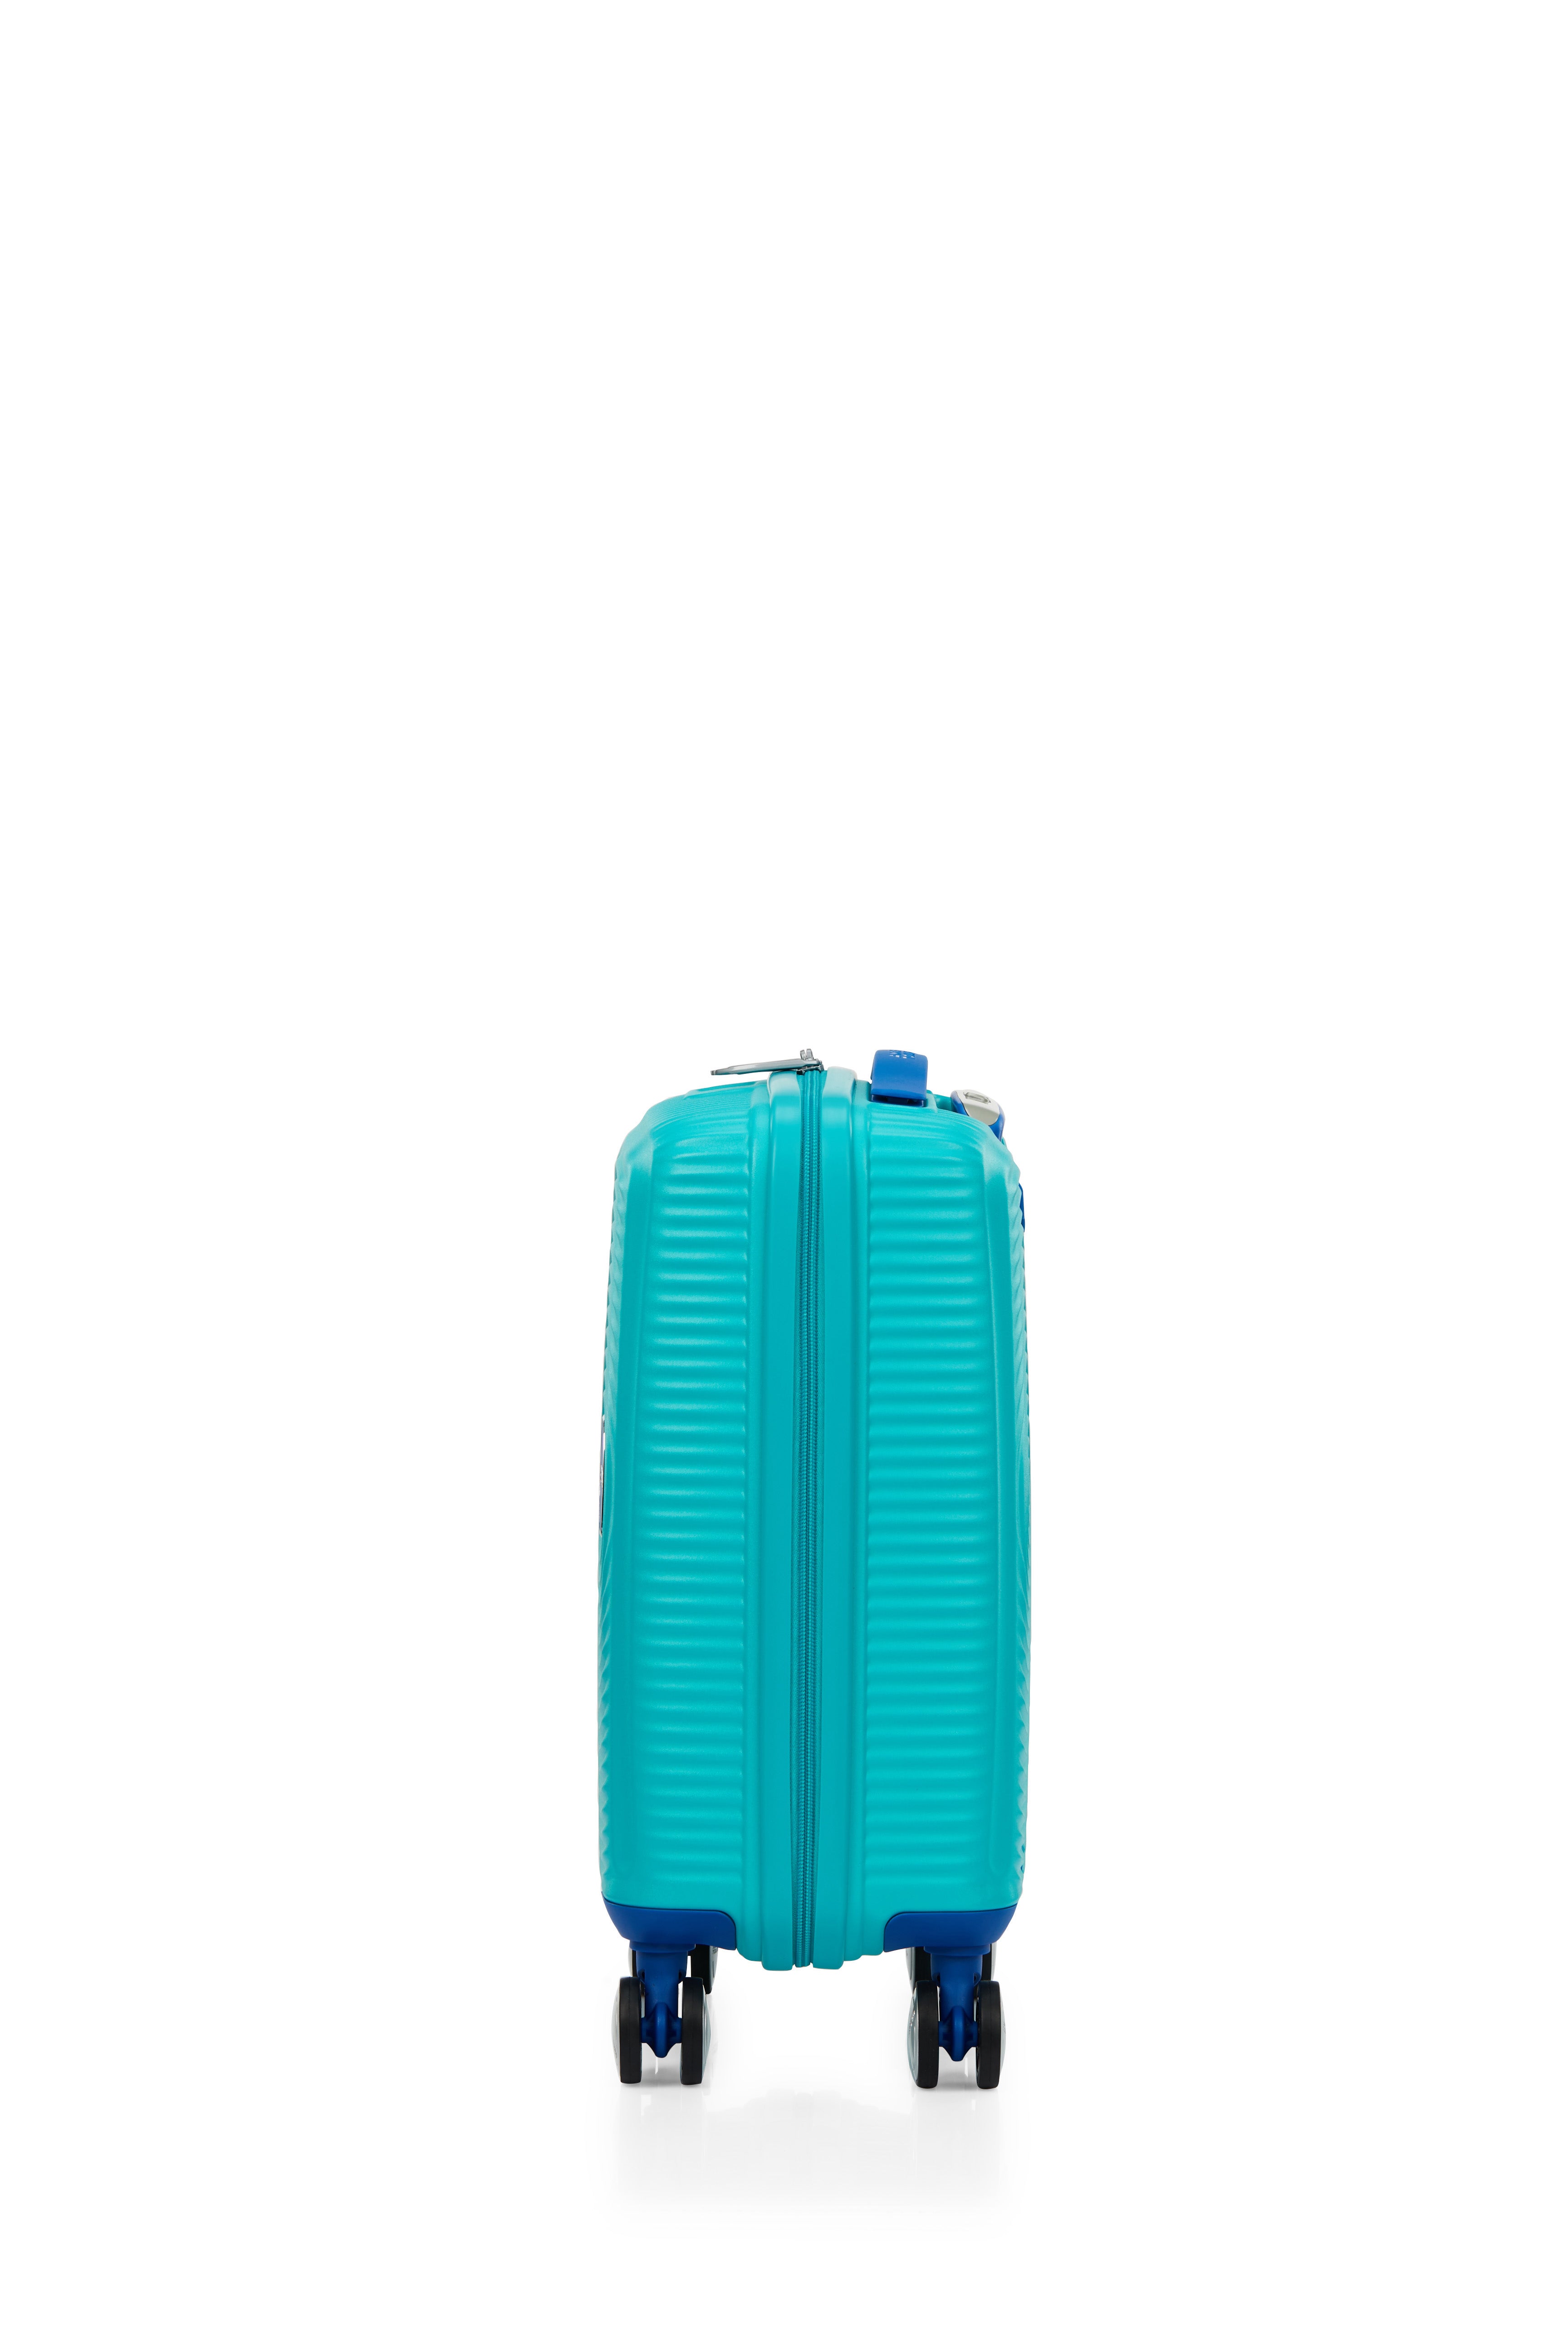 American Tourister - Little Curio 47cm Spinner - Teal/Blue-3